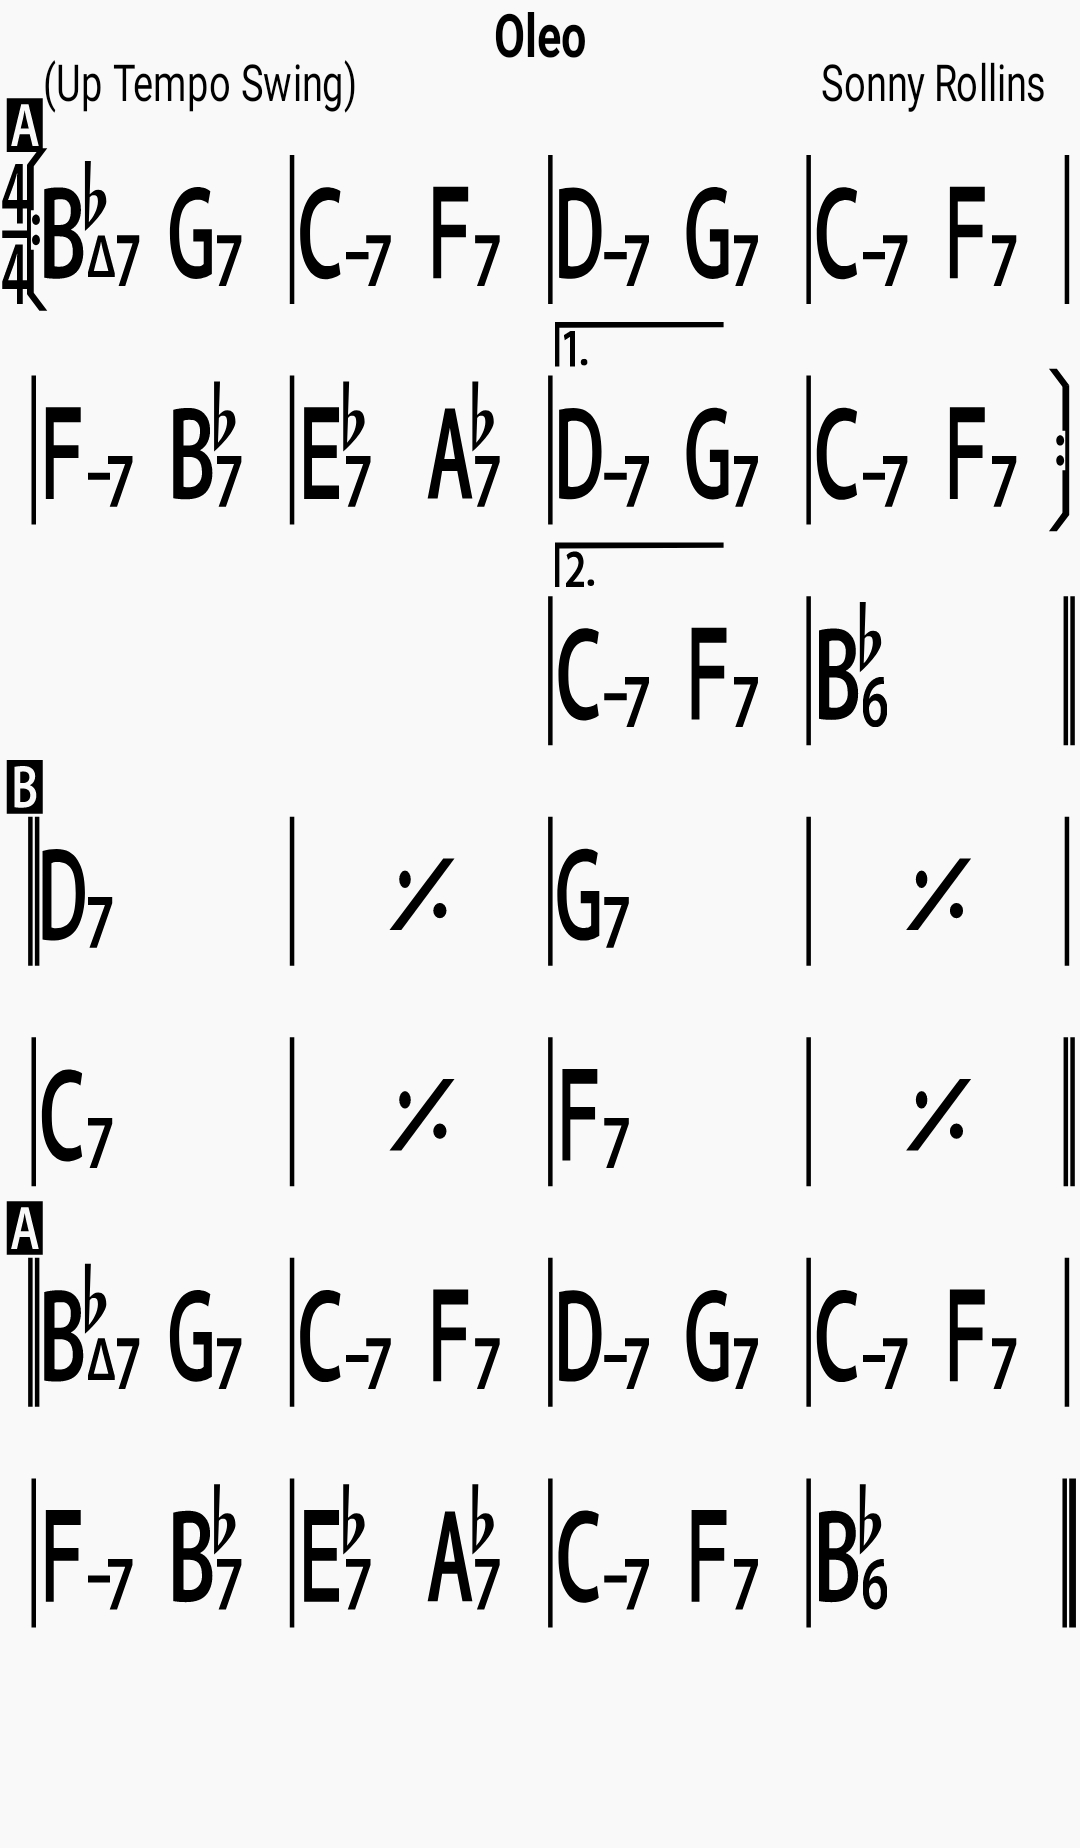 Chord chart for the jazz standard Oleo